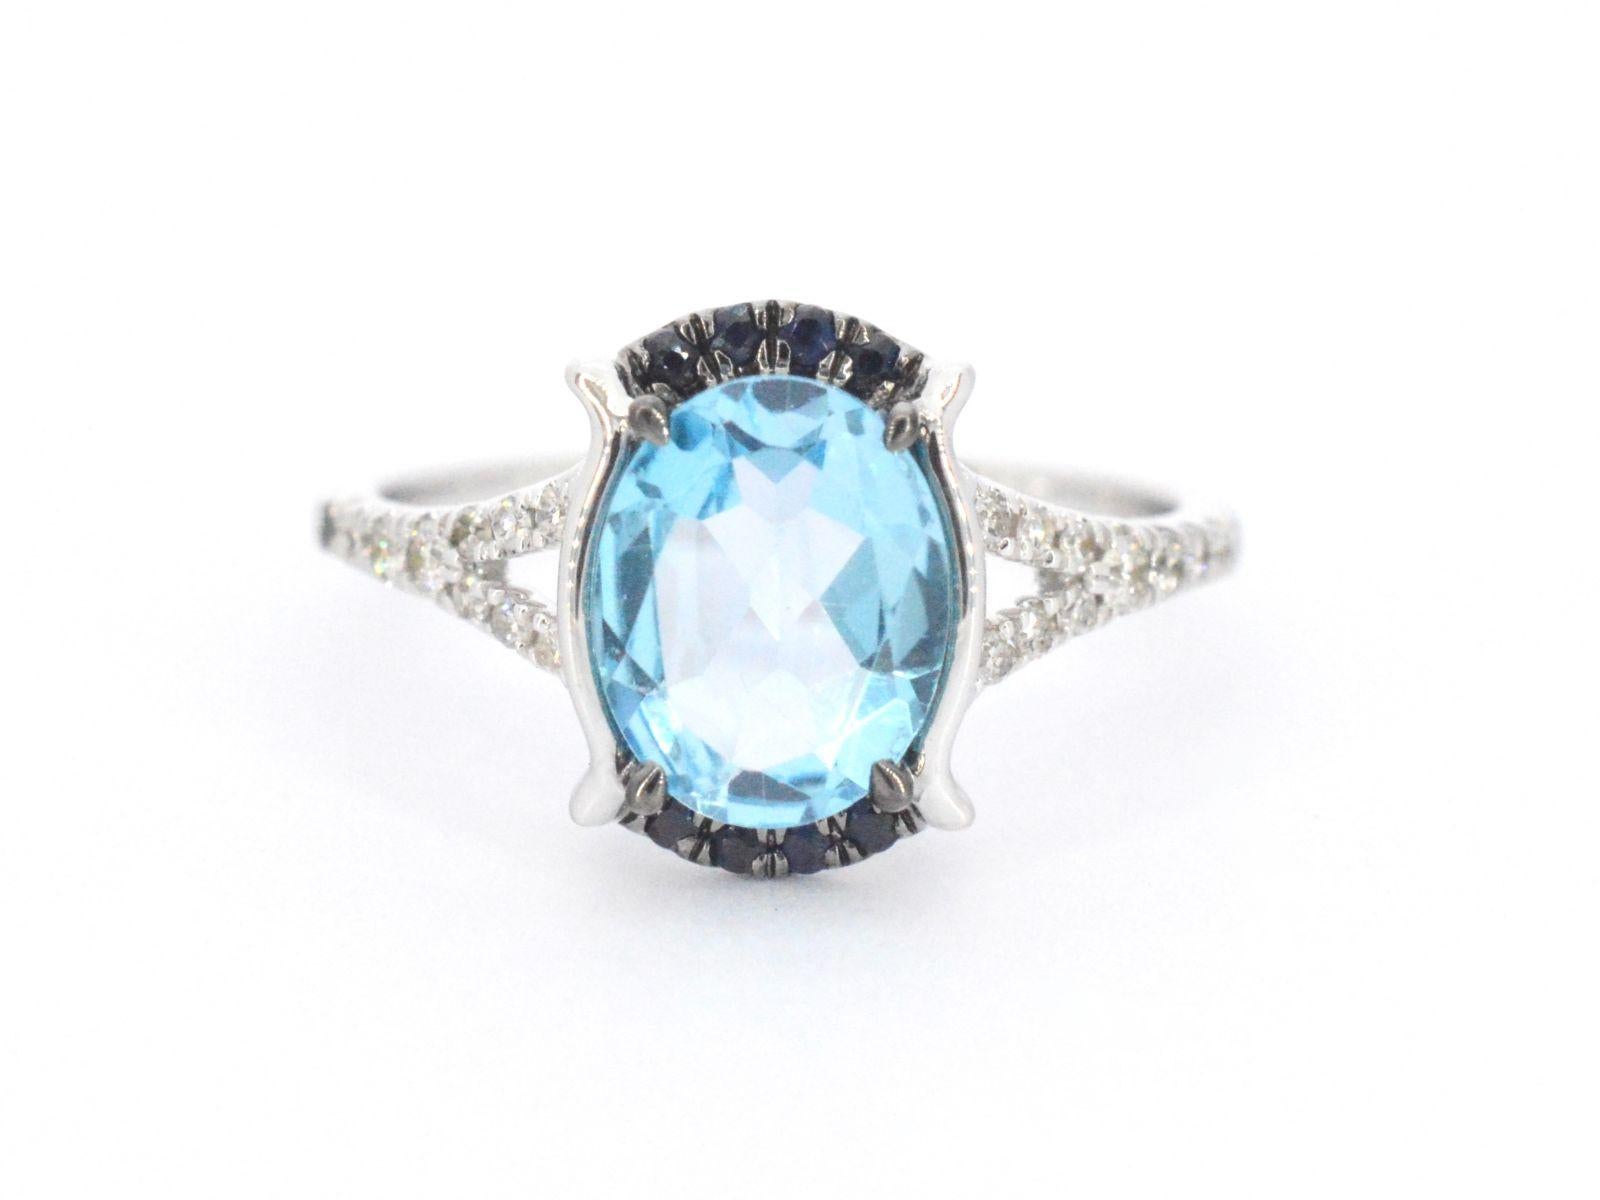 This stunning white gold design ring features a gorgeous topaz gemstone and a vibrant sapphire, accented by dazzling diamonds. The design of the ring is unique and eye-catching, with a modern and sophisticated feel. The diamonds are expertly placed